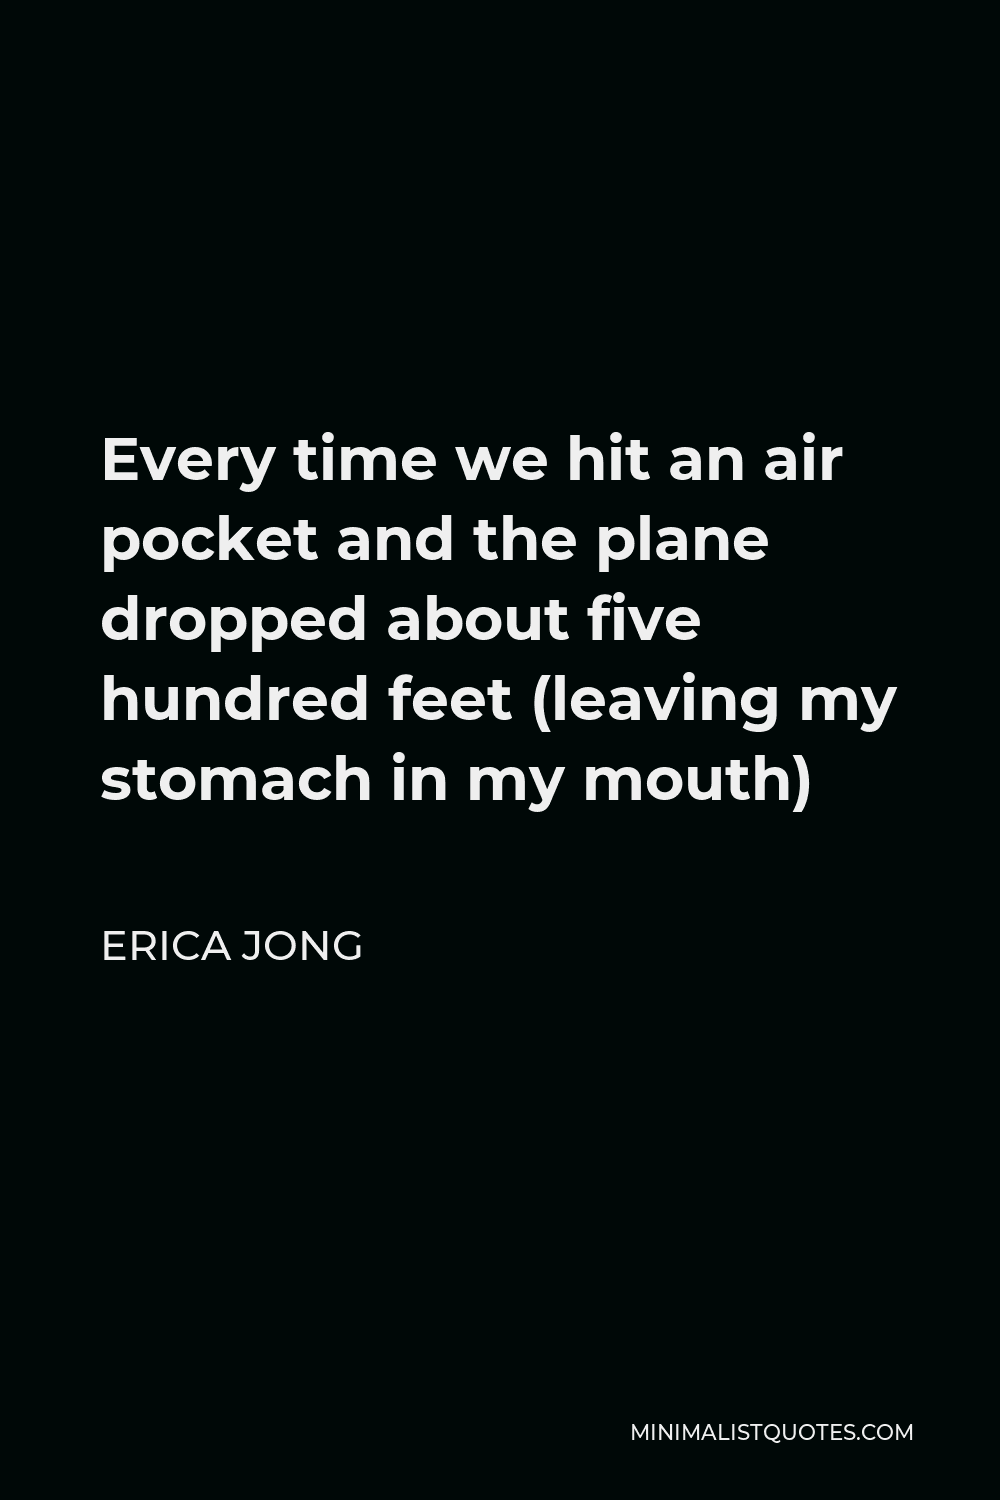 Erica Jong Quote - Every time we hit an air pocket and the plane dropped about five hundred feet (leaving my stomach in my mouth)